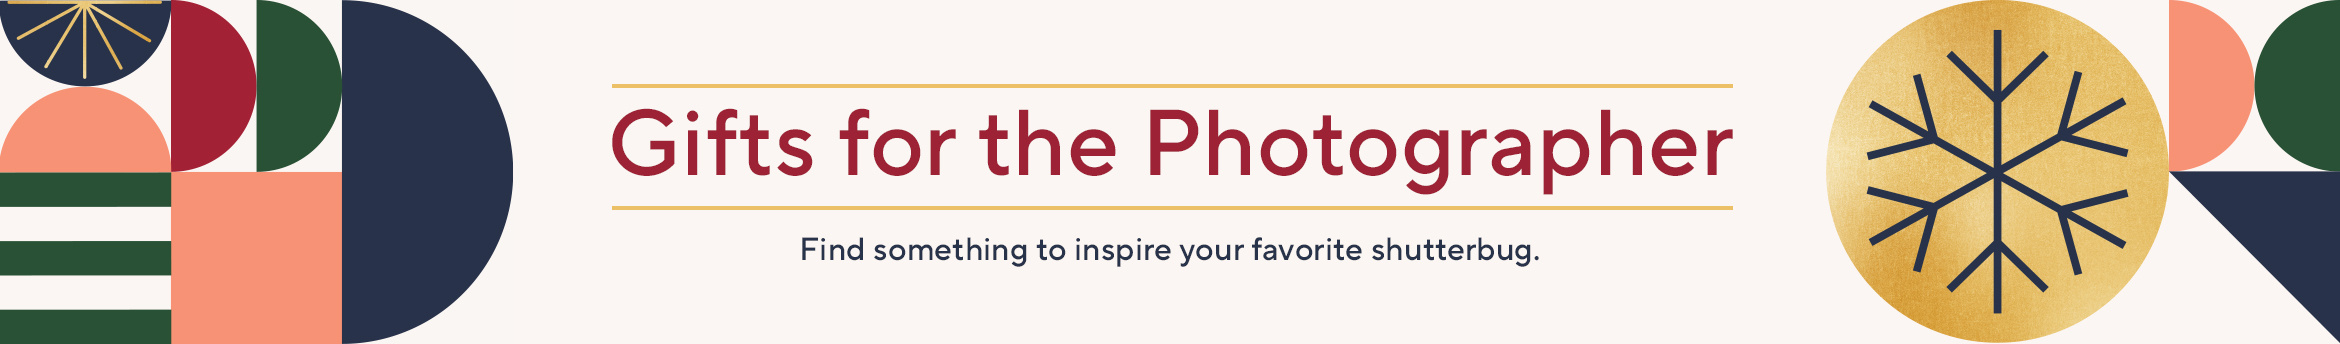 Gifts for the Photographer. Find something to inspire your favorite shutterbug.